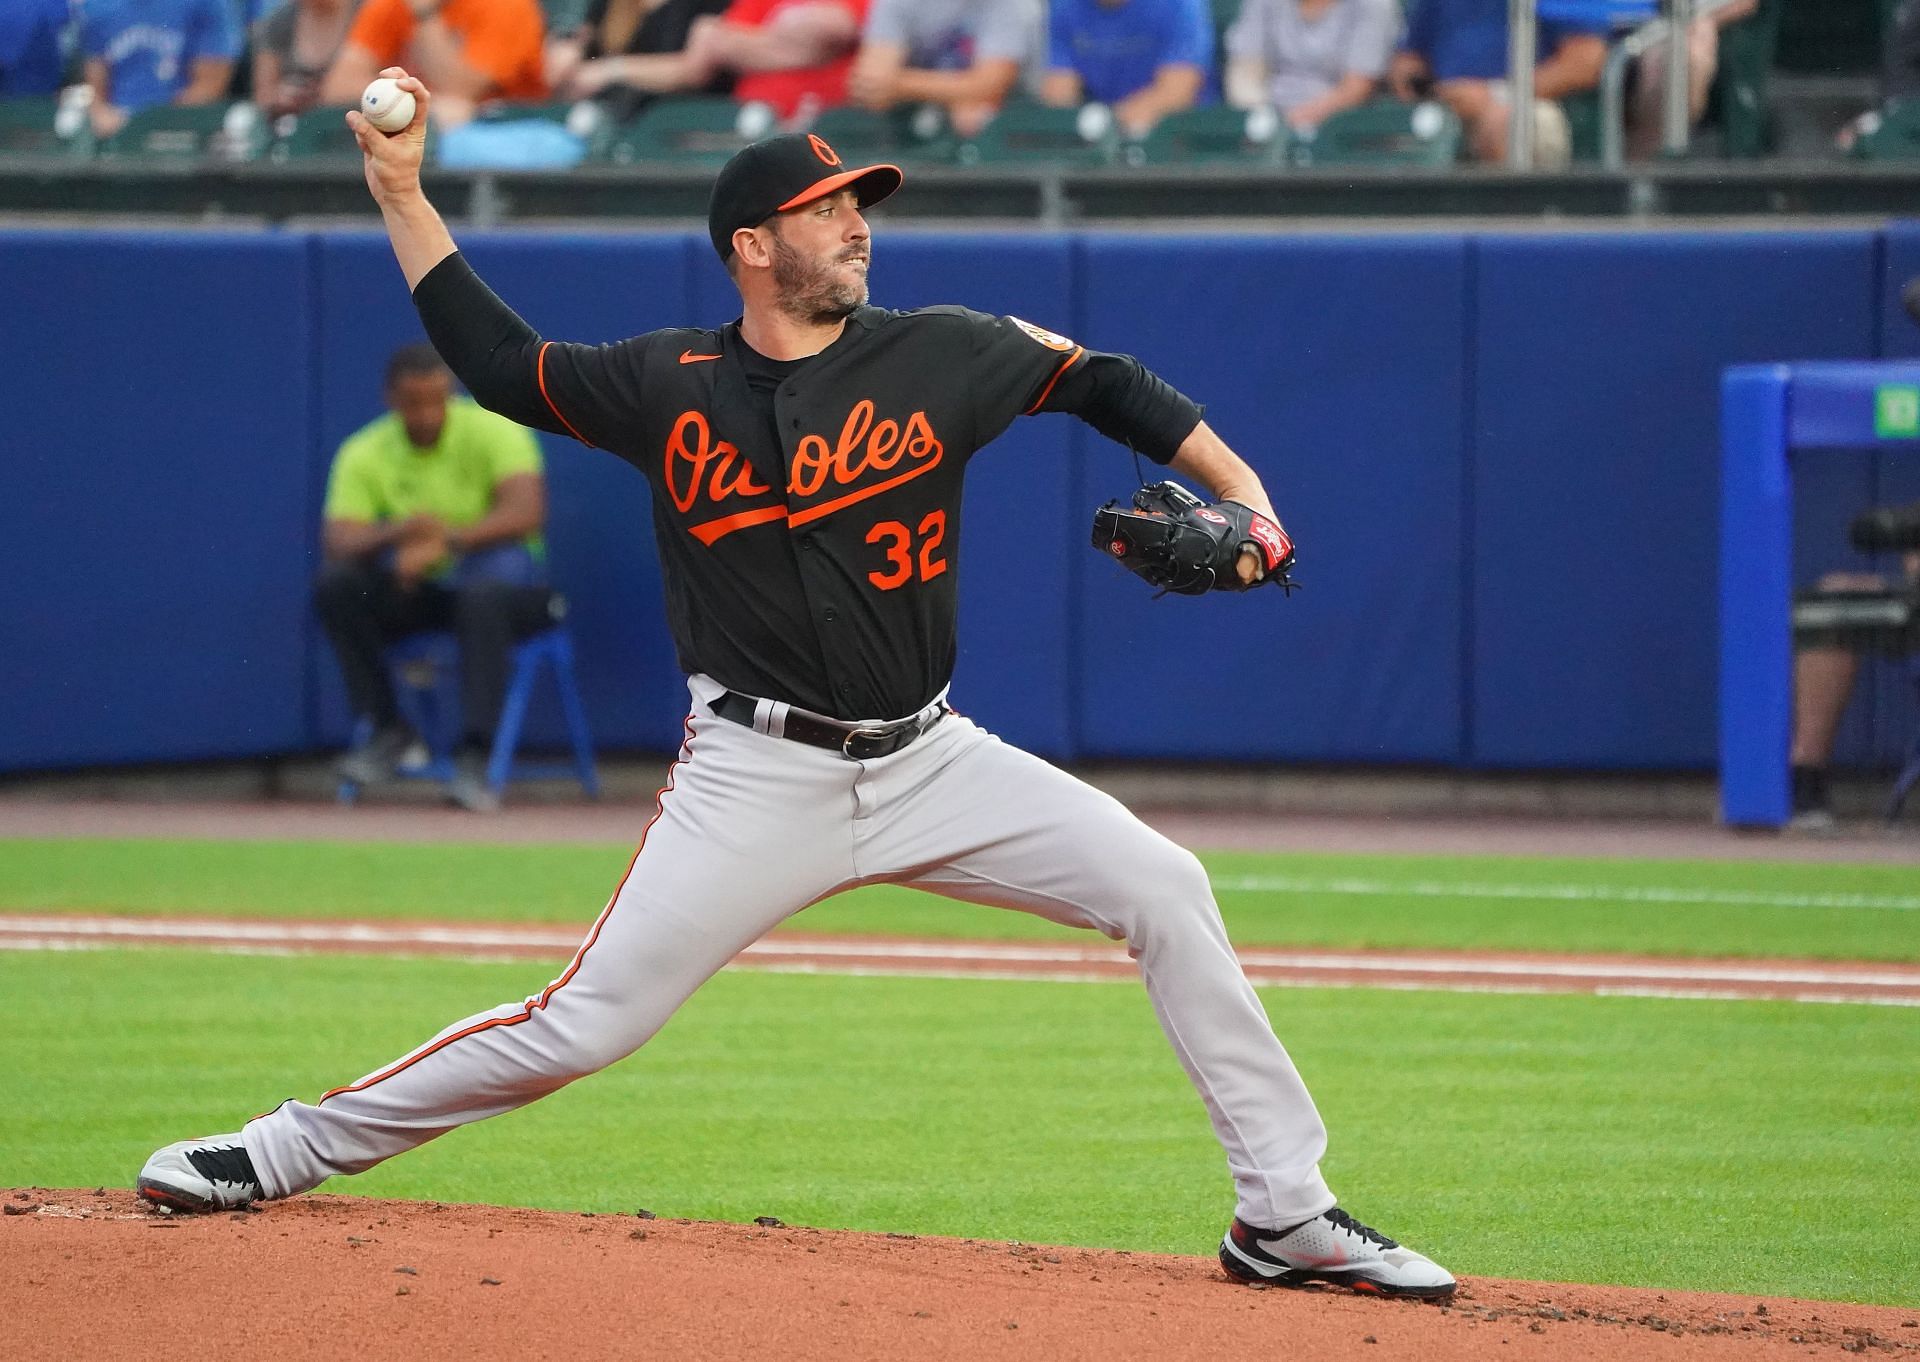 Orioles pitcher Harvey suspended 60 games after providing drugs to